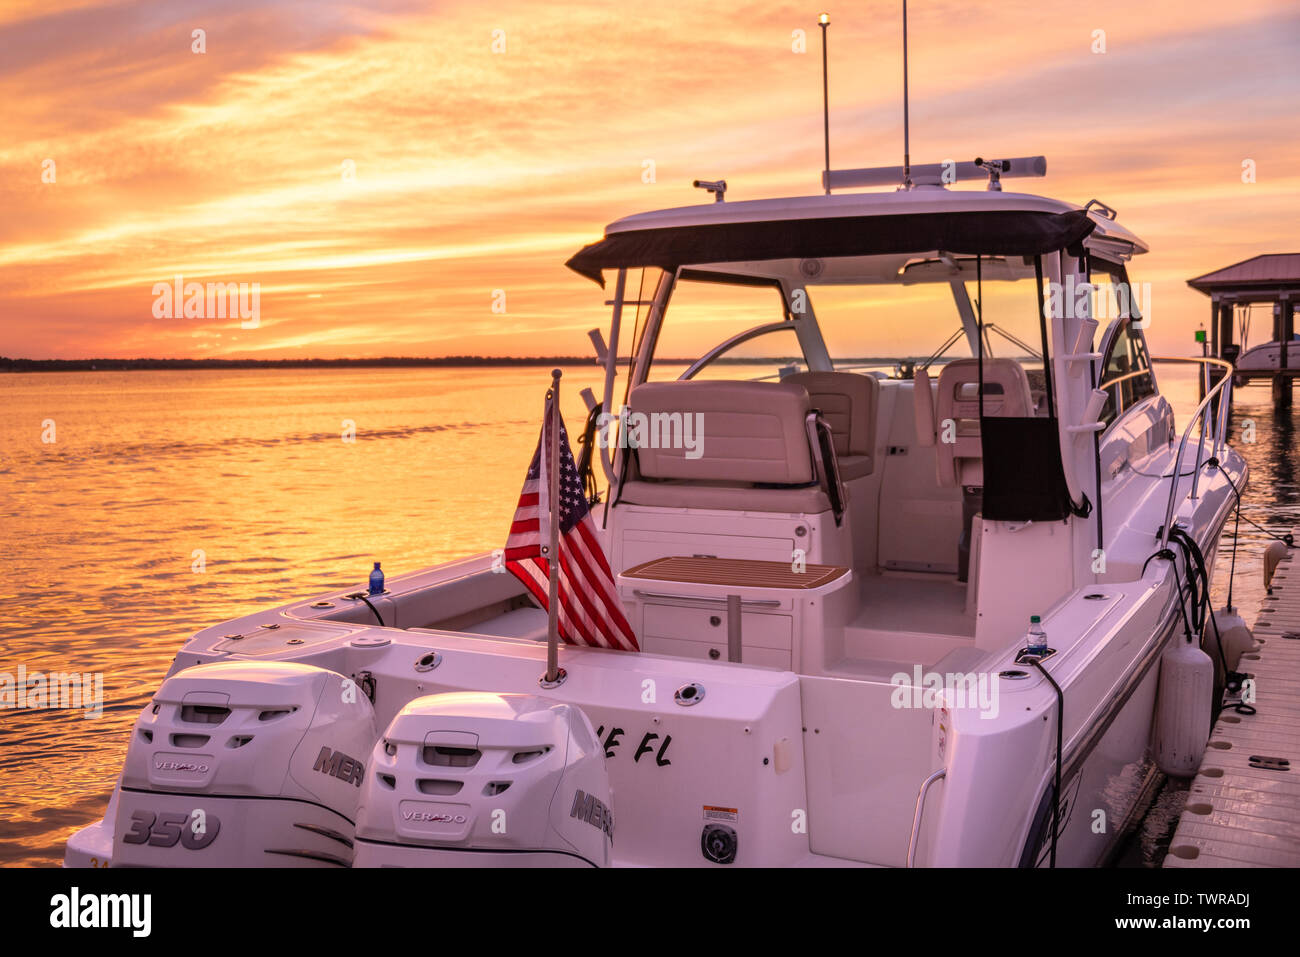 Boston Whaler docked at sunset on the Intracoastal Waterway in St. Augustine, Florida. (USA) Stock Photo